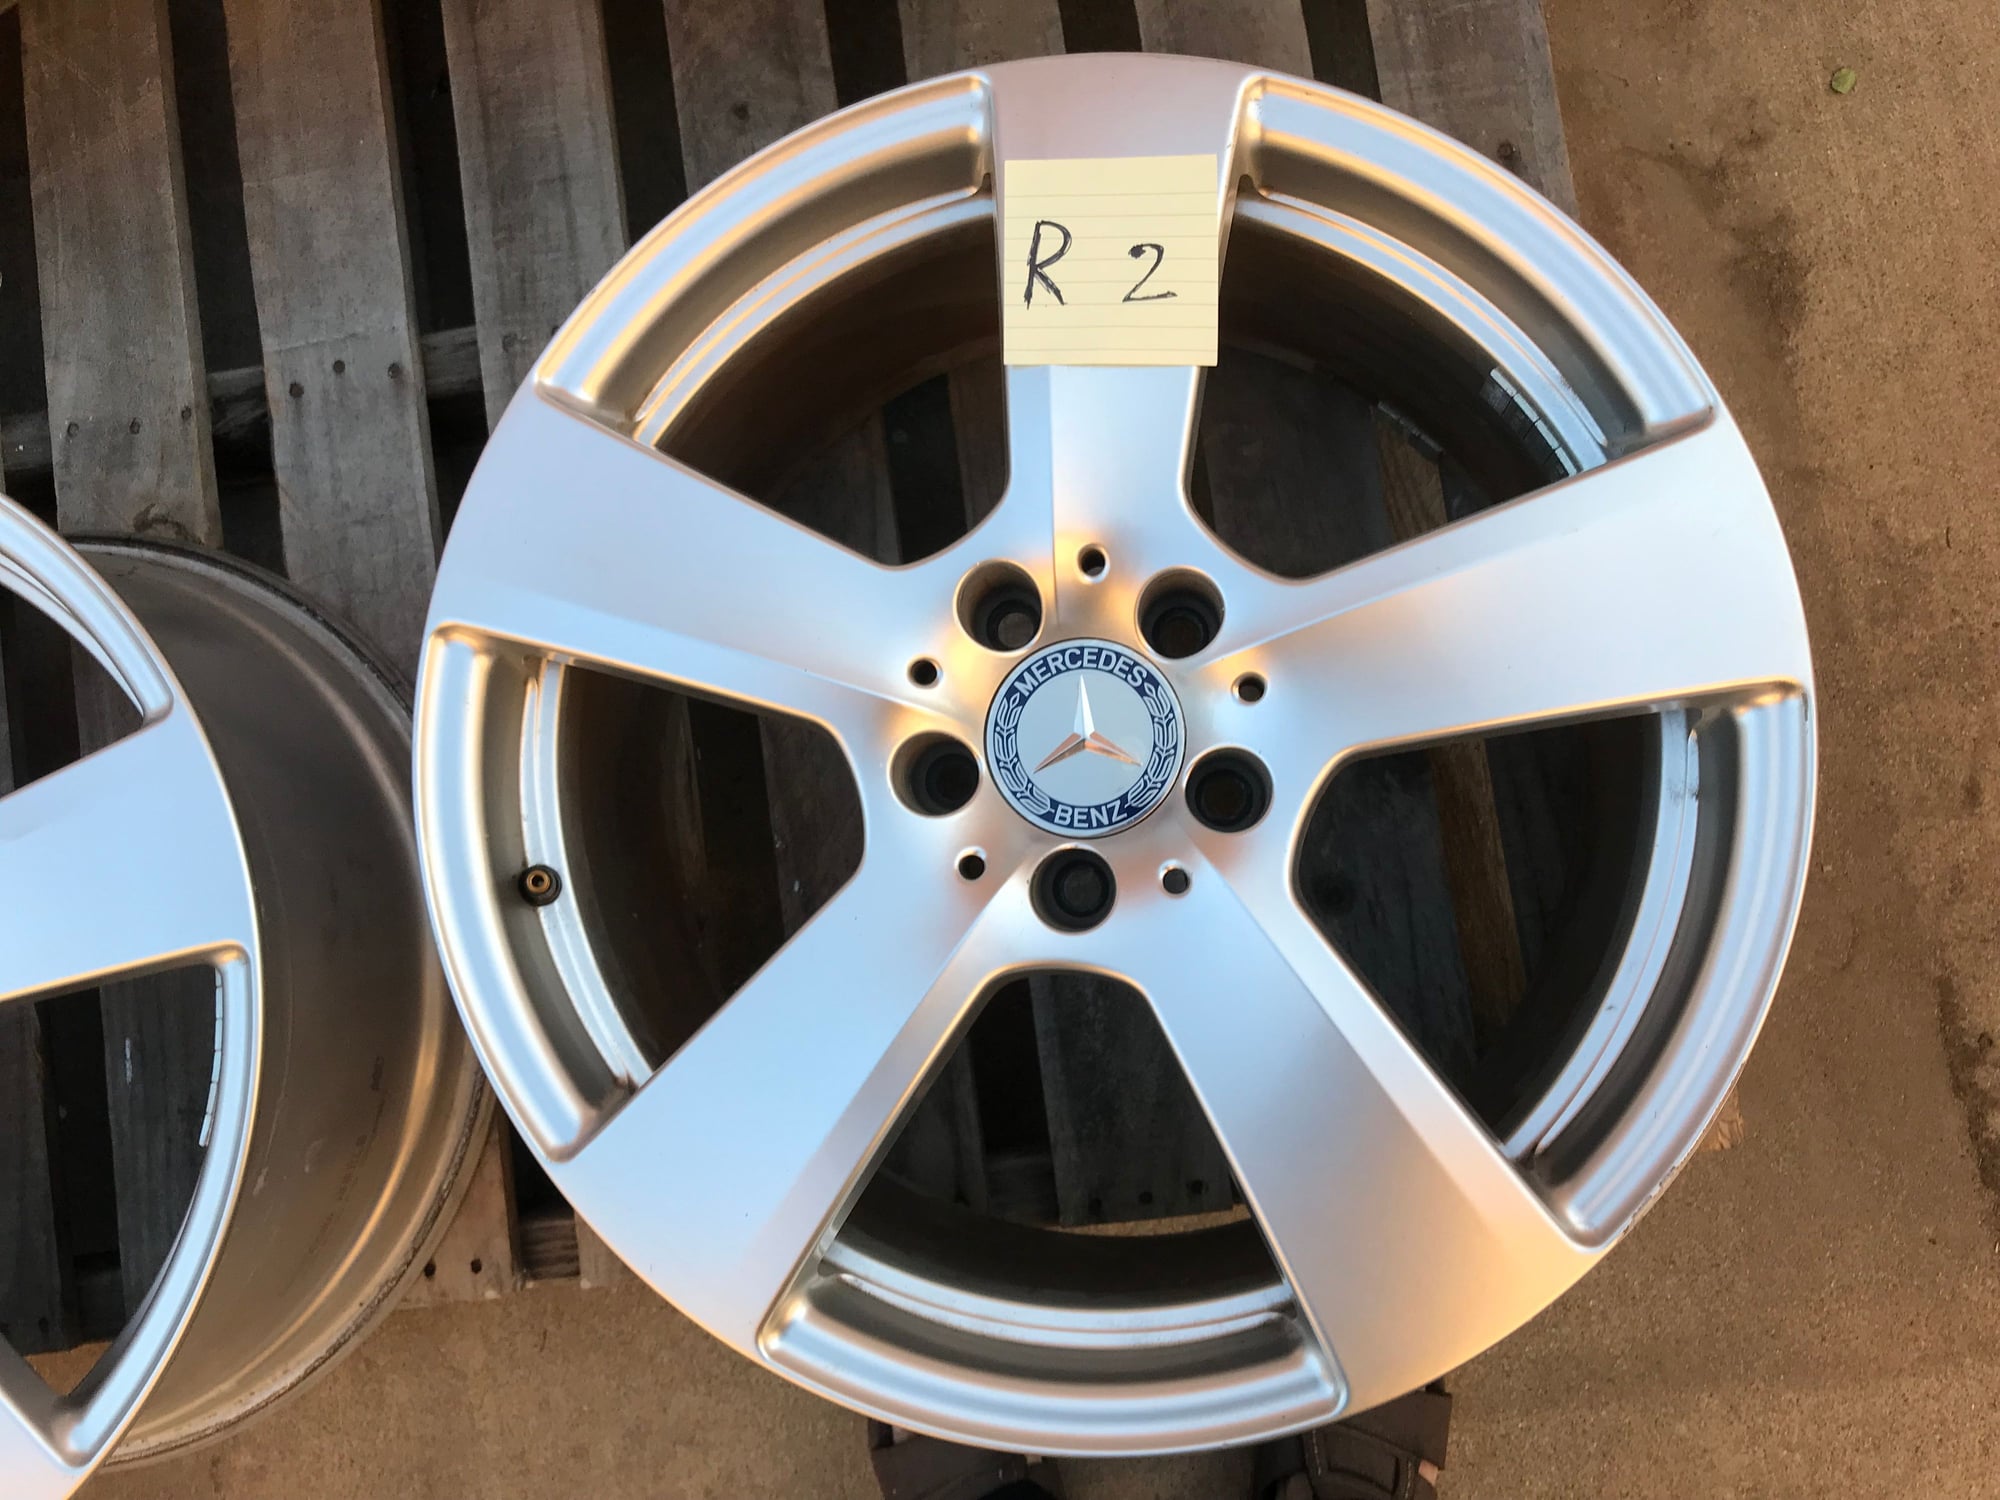 2010-2012 MB E350 (W212) OEM rims for $500 (firm) - MBWorld.org Forums